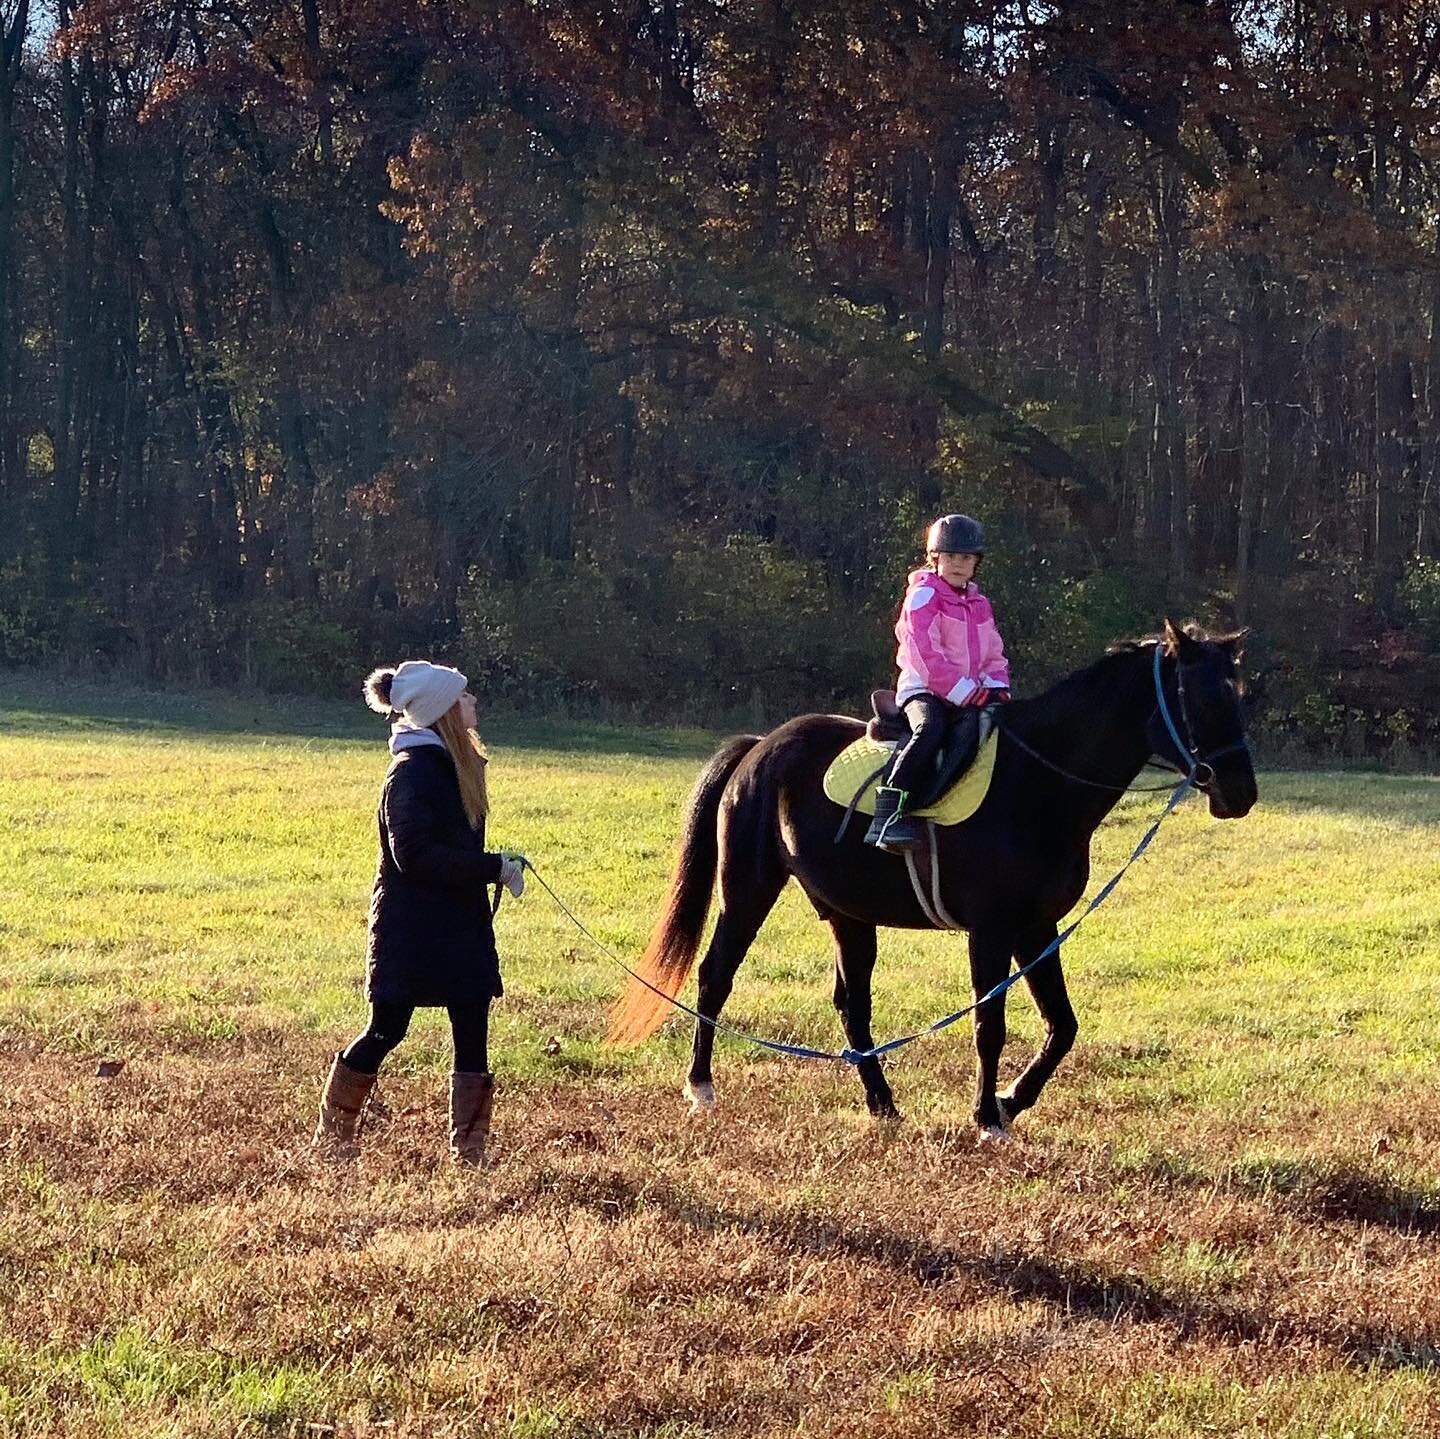 Piper has been a lucky girl this past month and has been learning to ride!  Makes me so happy to see her love horses! 🐴